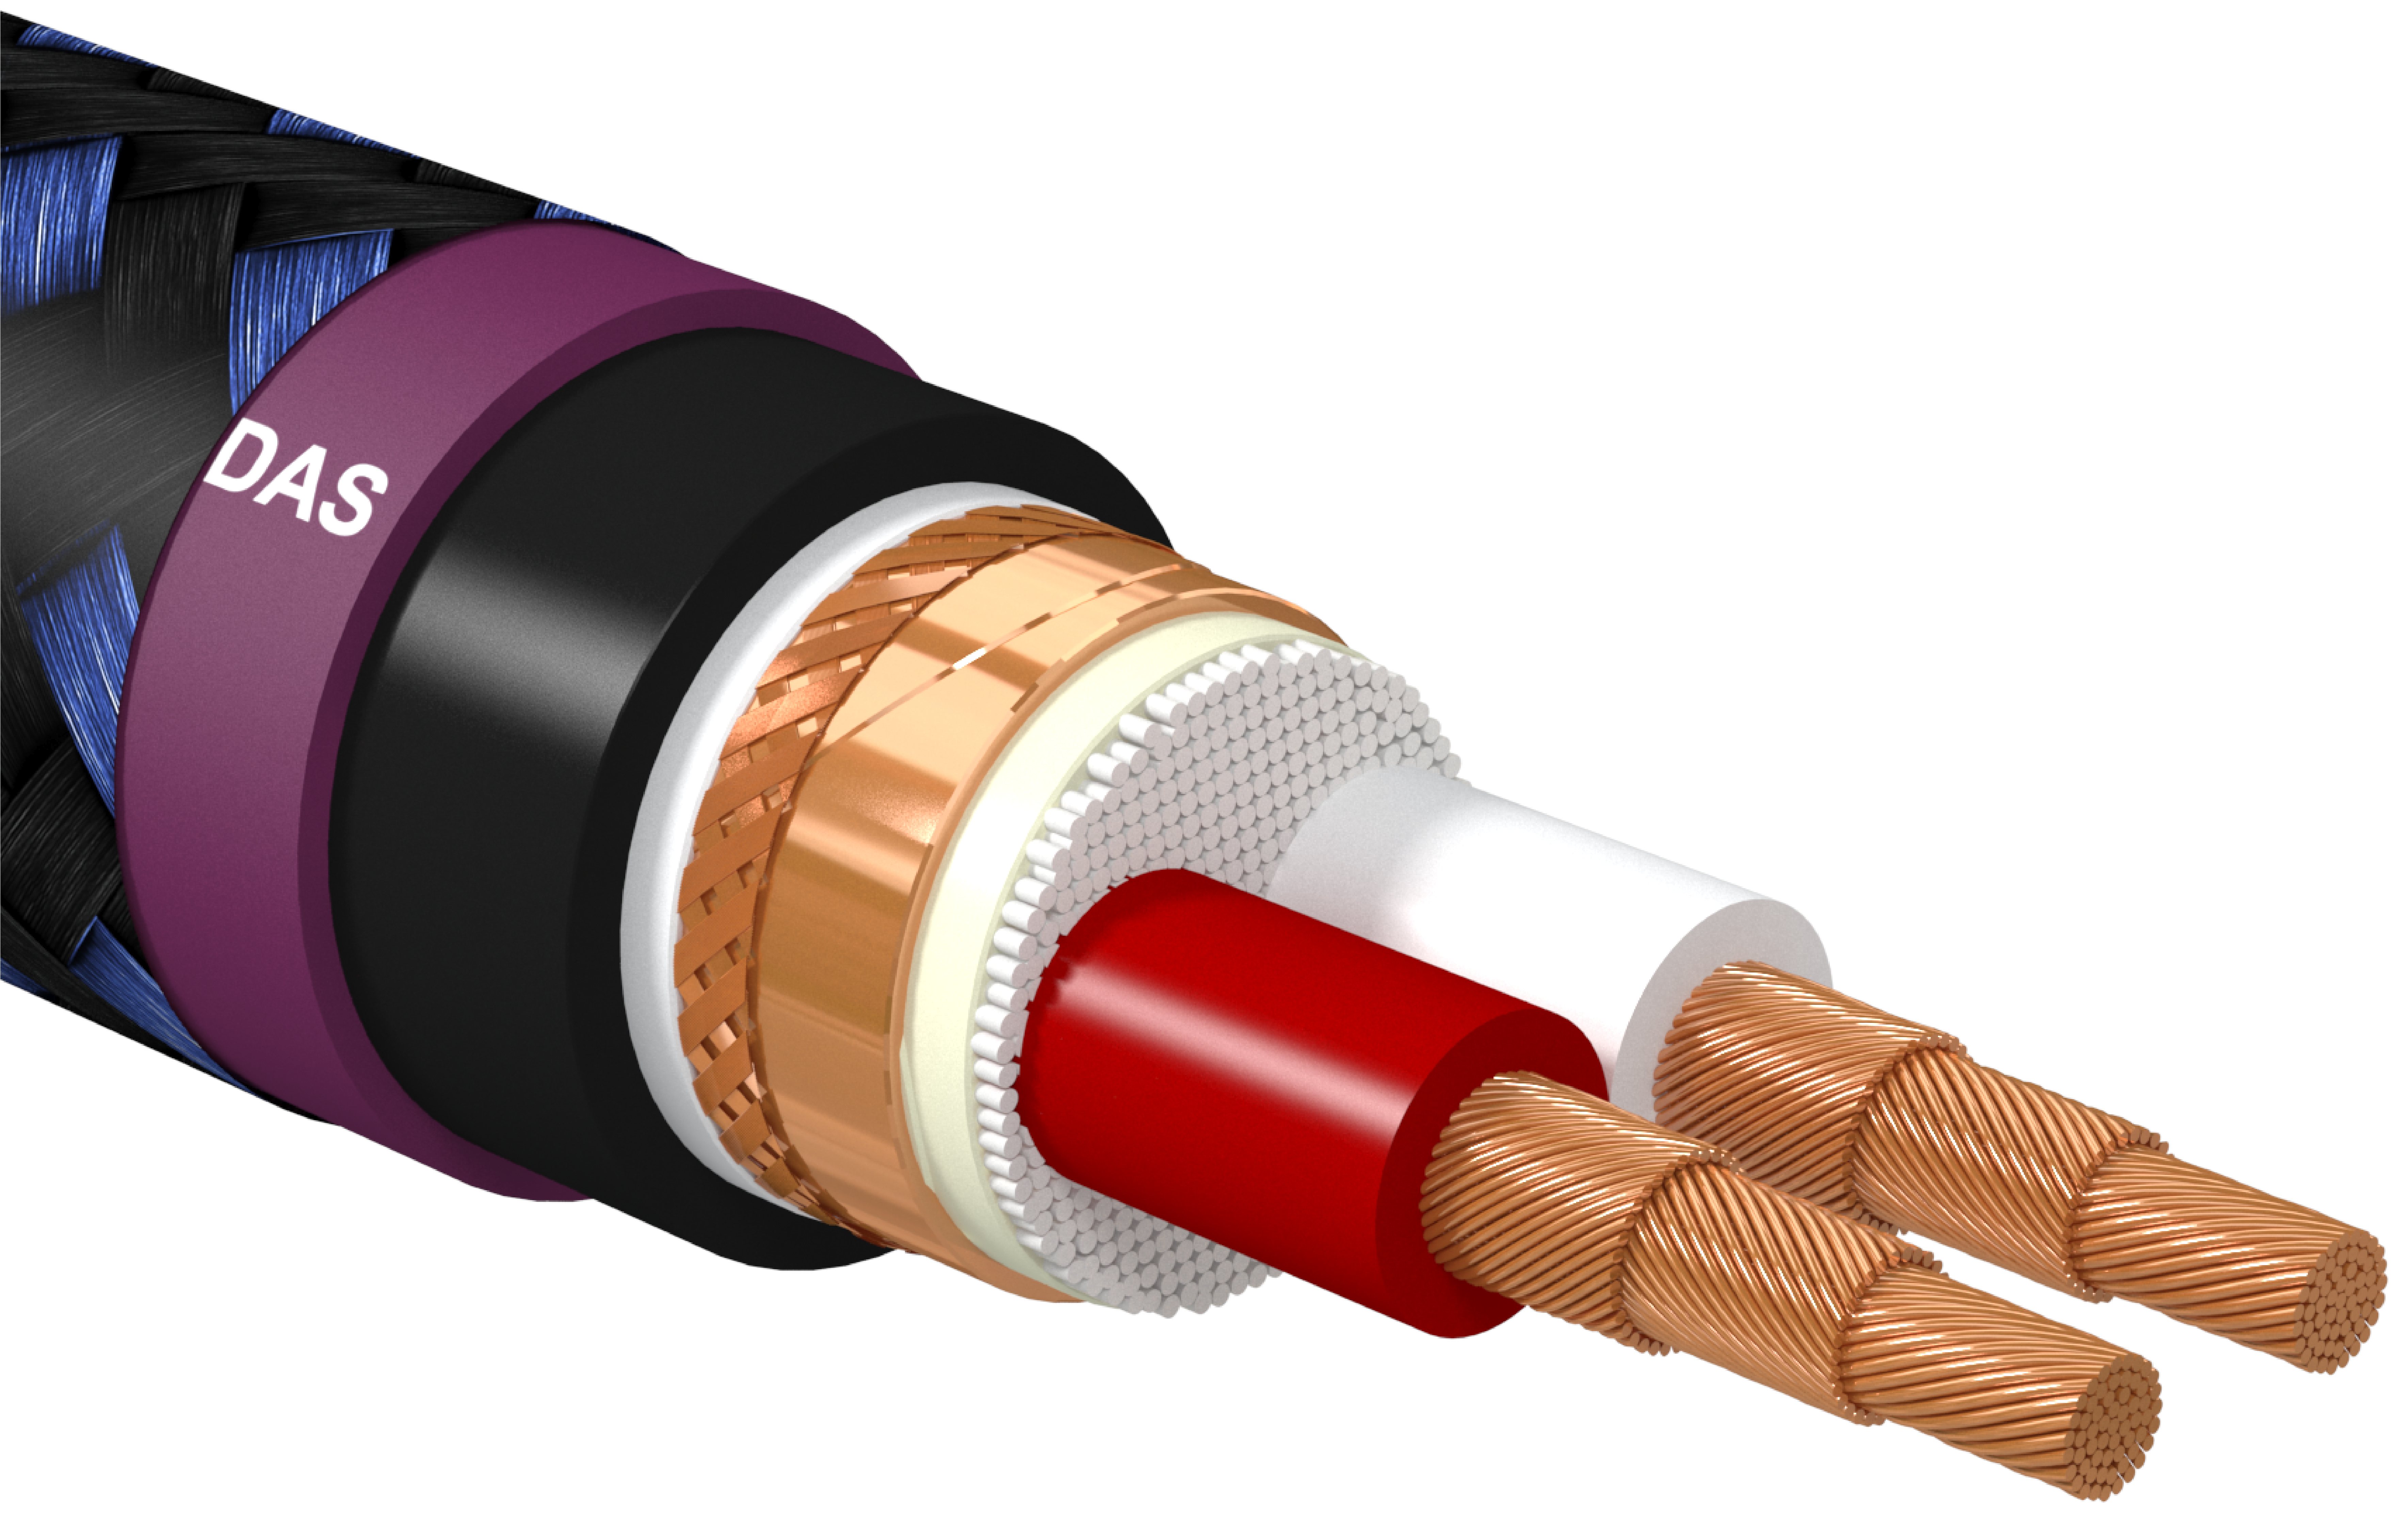 New DAS-4.1 top-of-range bulk balanced interconnect cable from Furutech